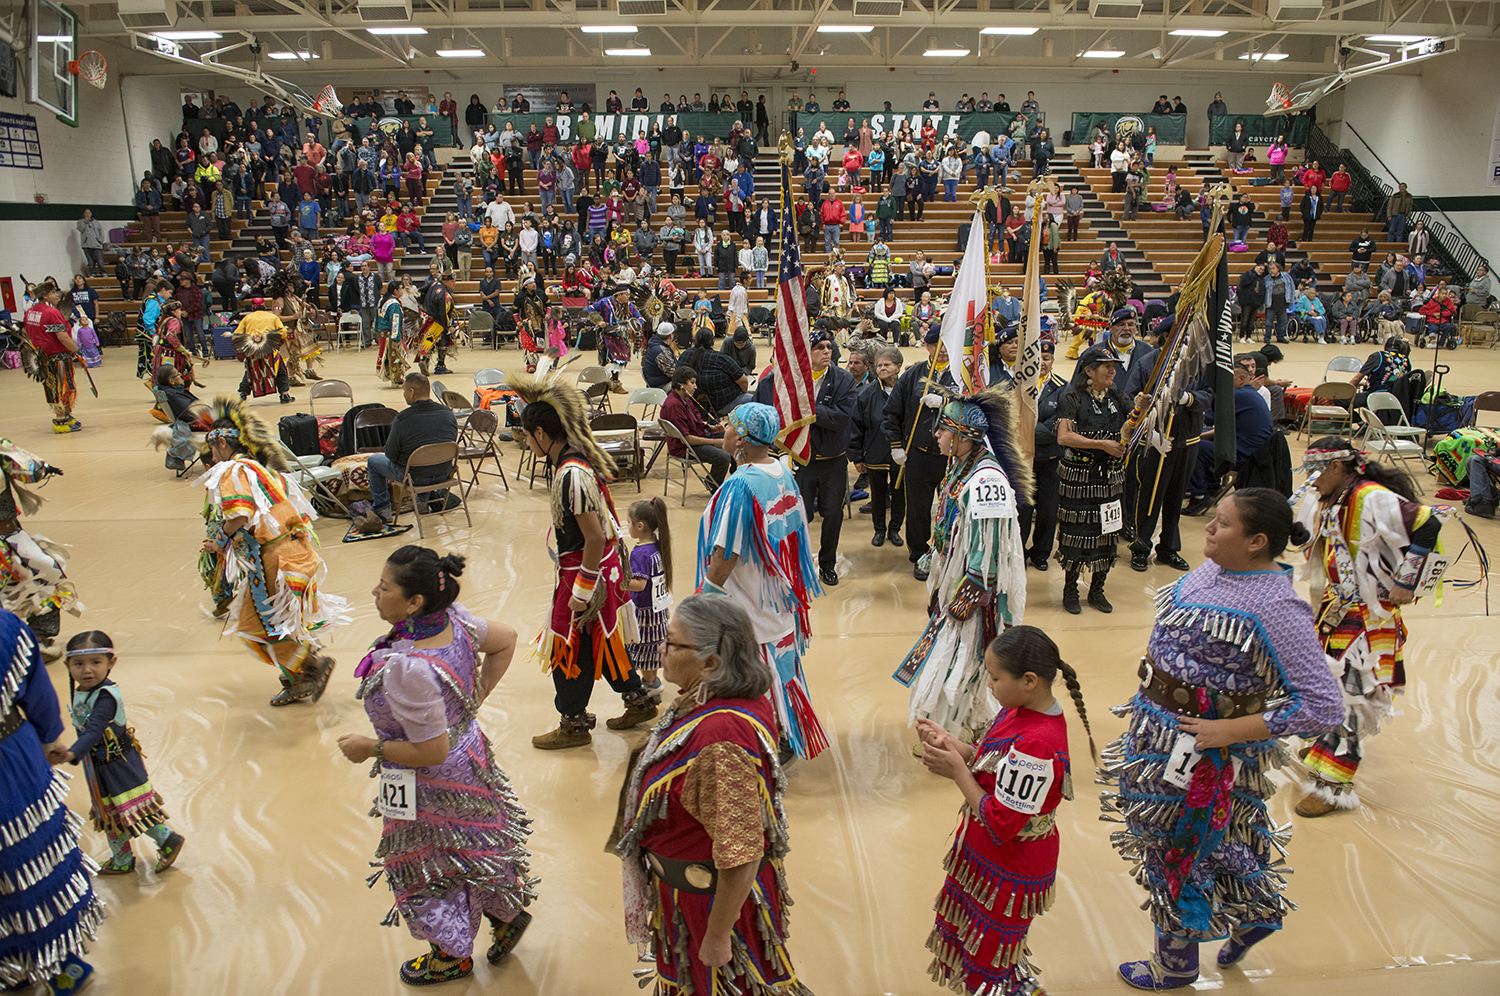 BSU Council of Indian Students Powwow, 2018